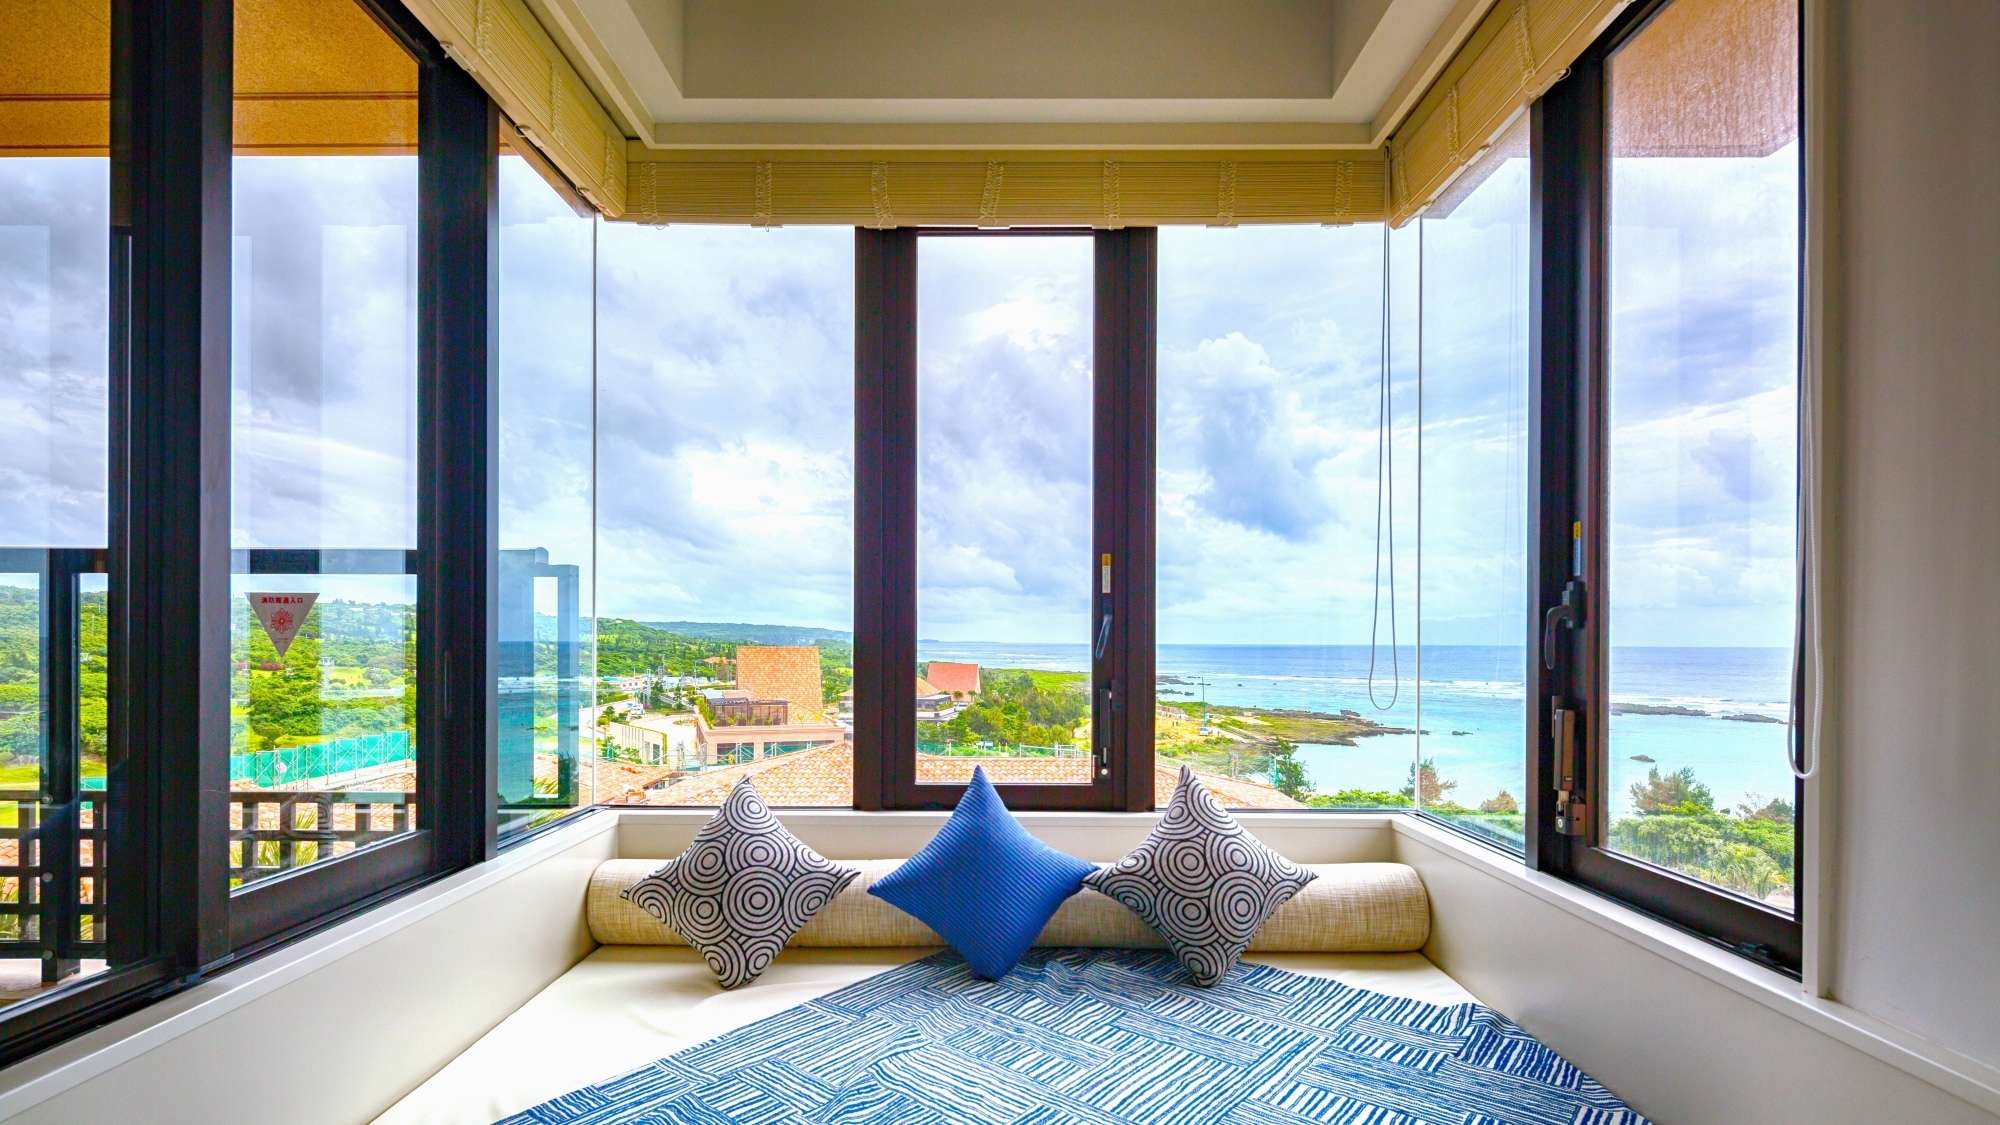 [Bayside/Deluxe Suite 1 Bedroom] Equipped with a daybed, you can fully enjoy the luxurious island time